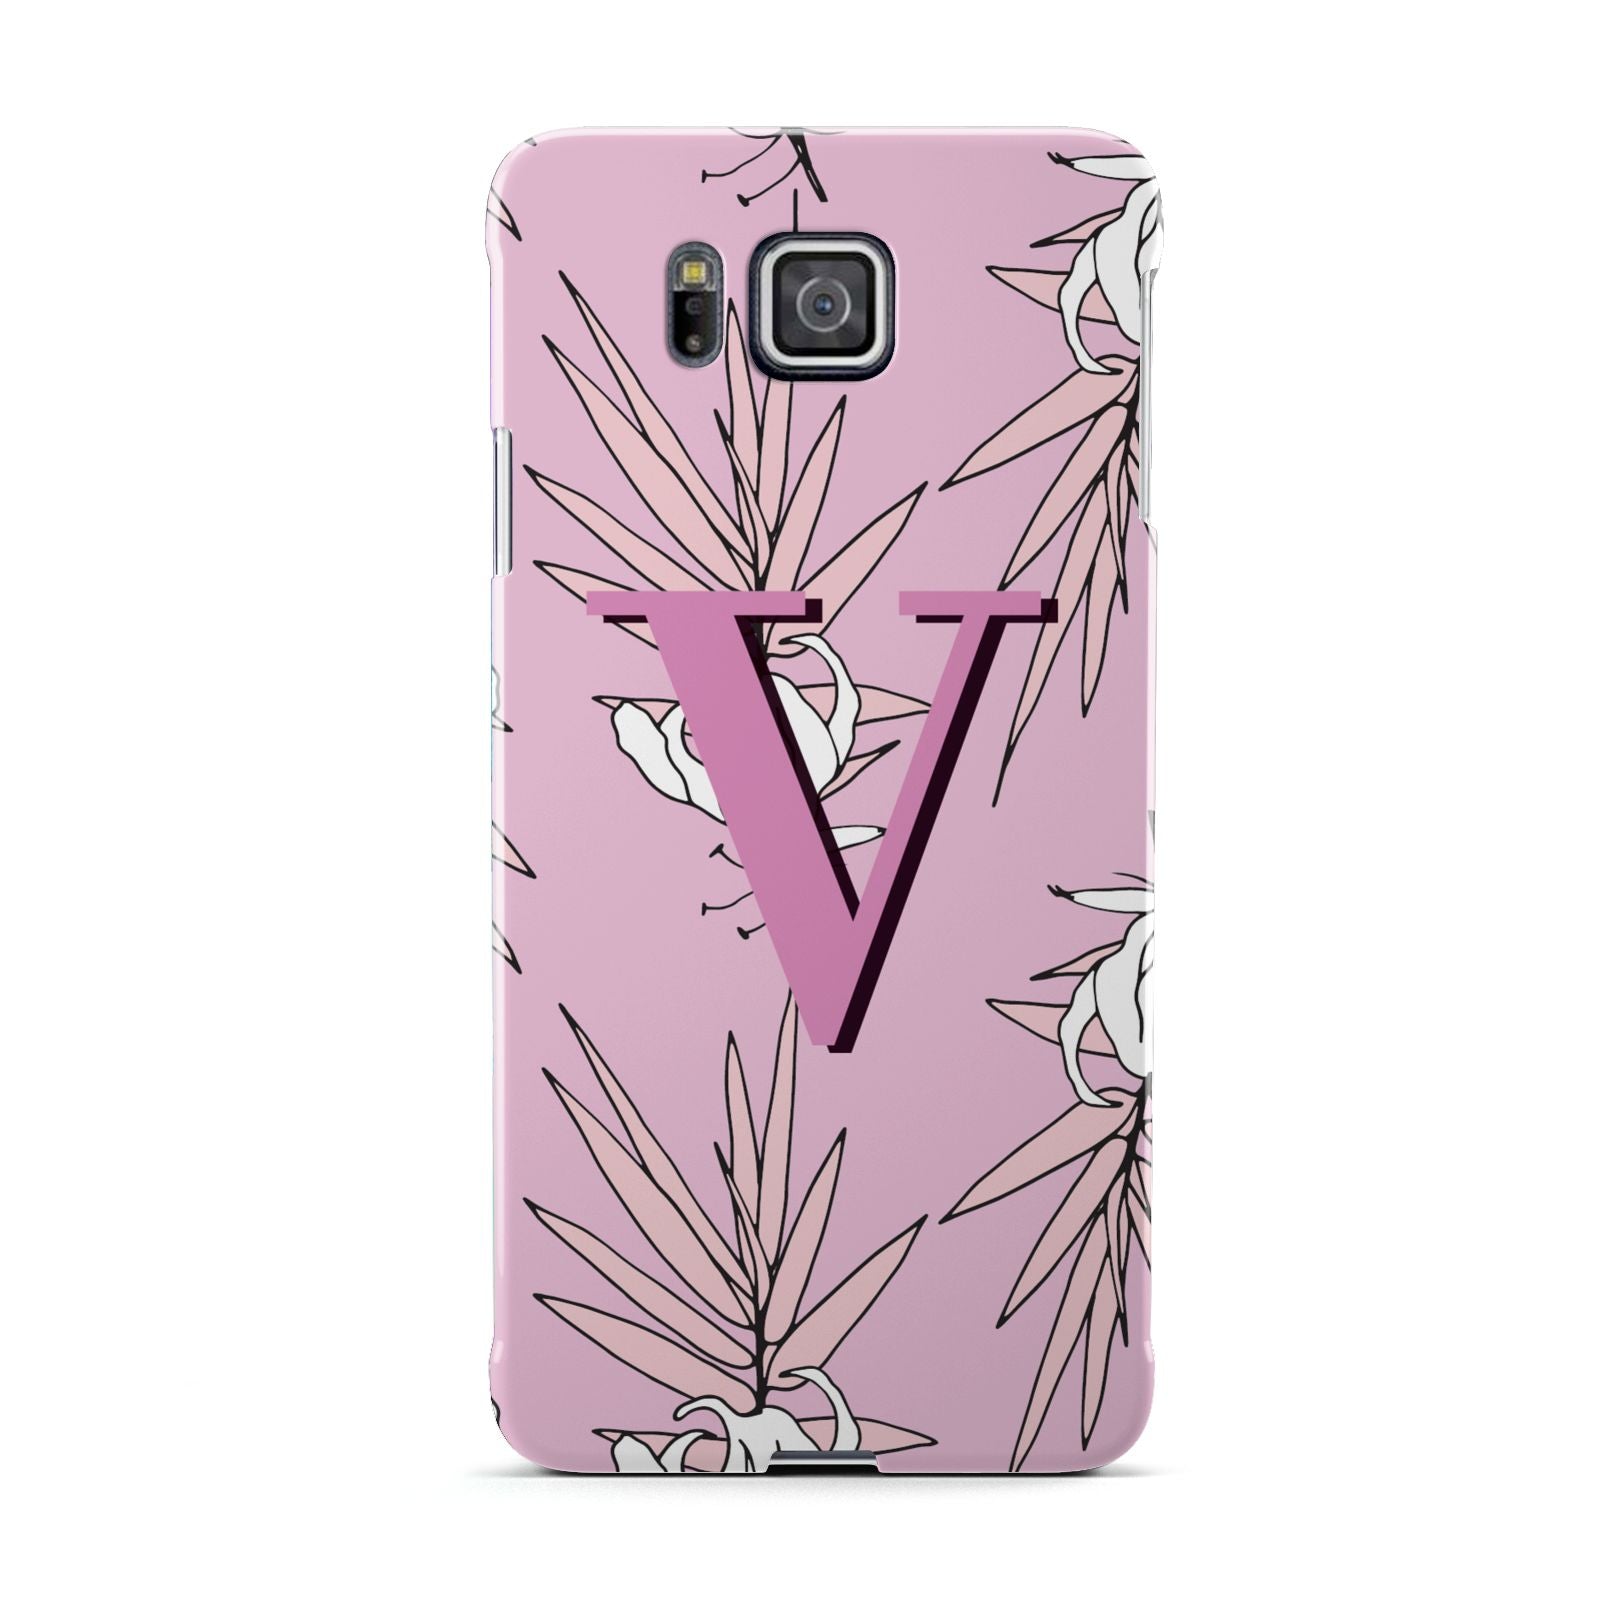 Personalised Pink and White Floral Monogram Samsung Galaxy Alpha Case